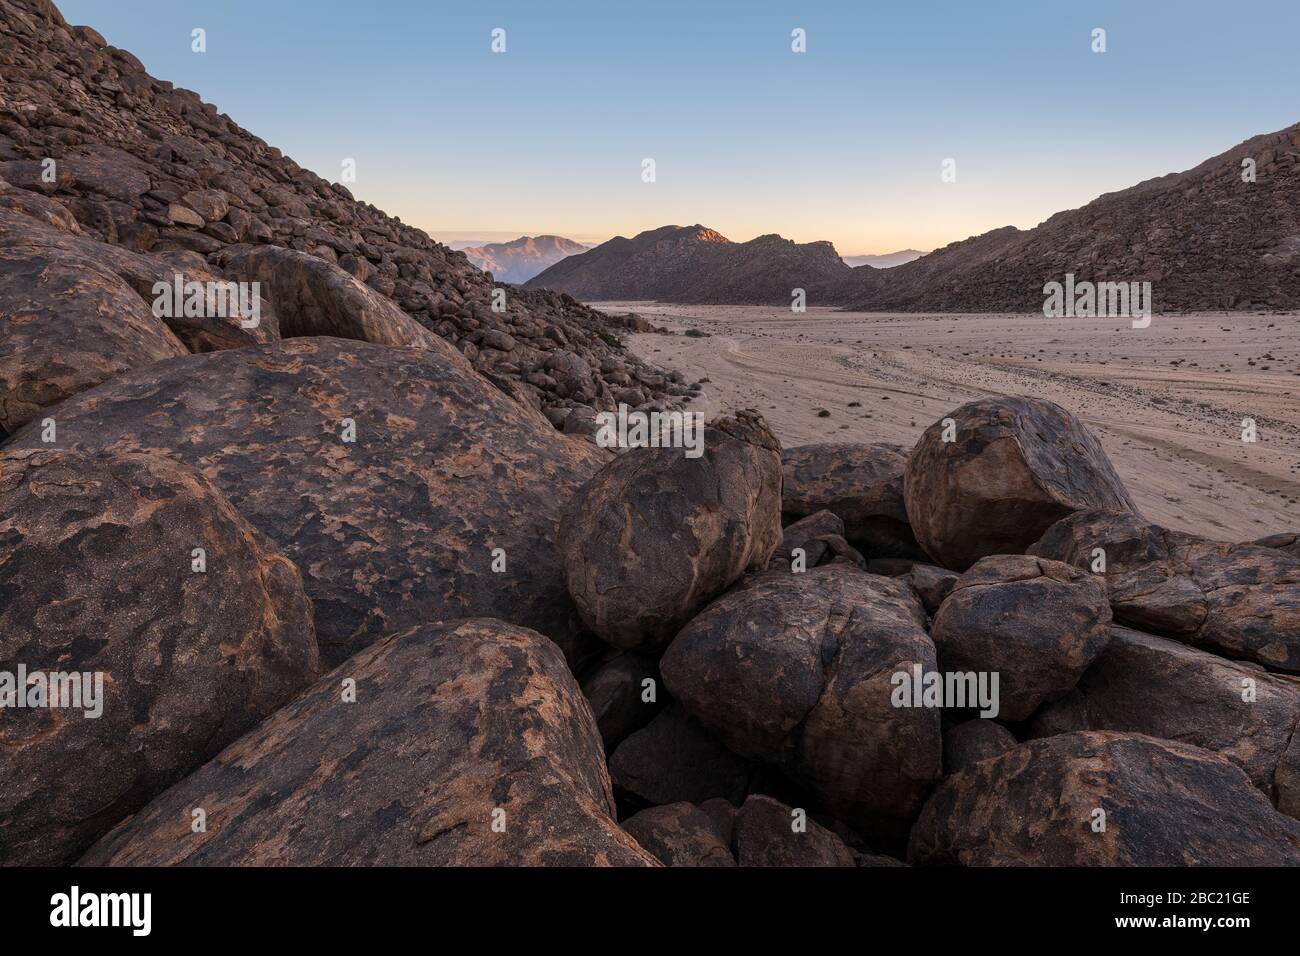 A beautiful arid mountain landscape at sunrise, with fascinating geology and rock formations in the foreground and a mountain range in the background, Stock Photo